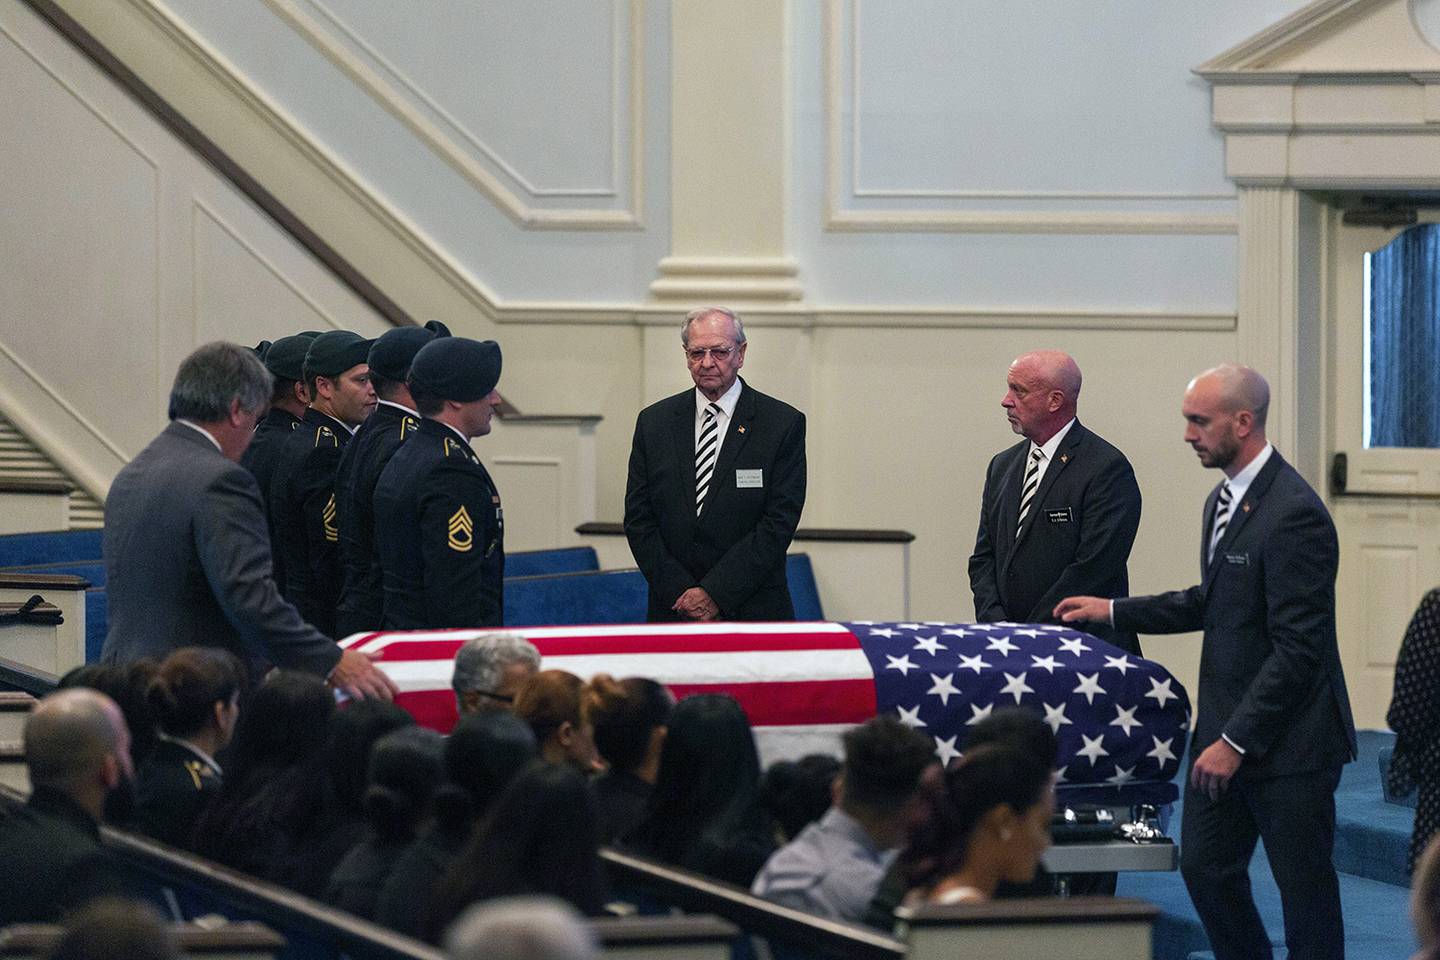 Funeral services for U.S. Army Green Beret Master Sgt. Luis DeLeon-Figueroa, who was killed in action in Afghanistan on Aug. 21, are held at Bethany Assembly of God Church in Agawam, Mass. Tuesday, Sept. 3, 2019.